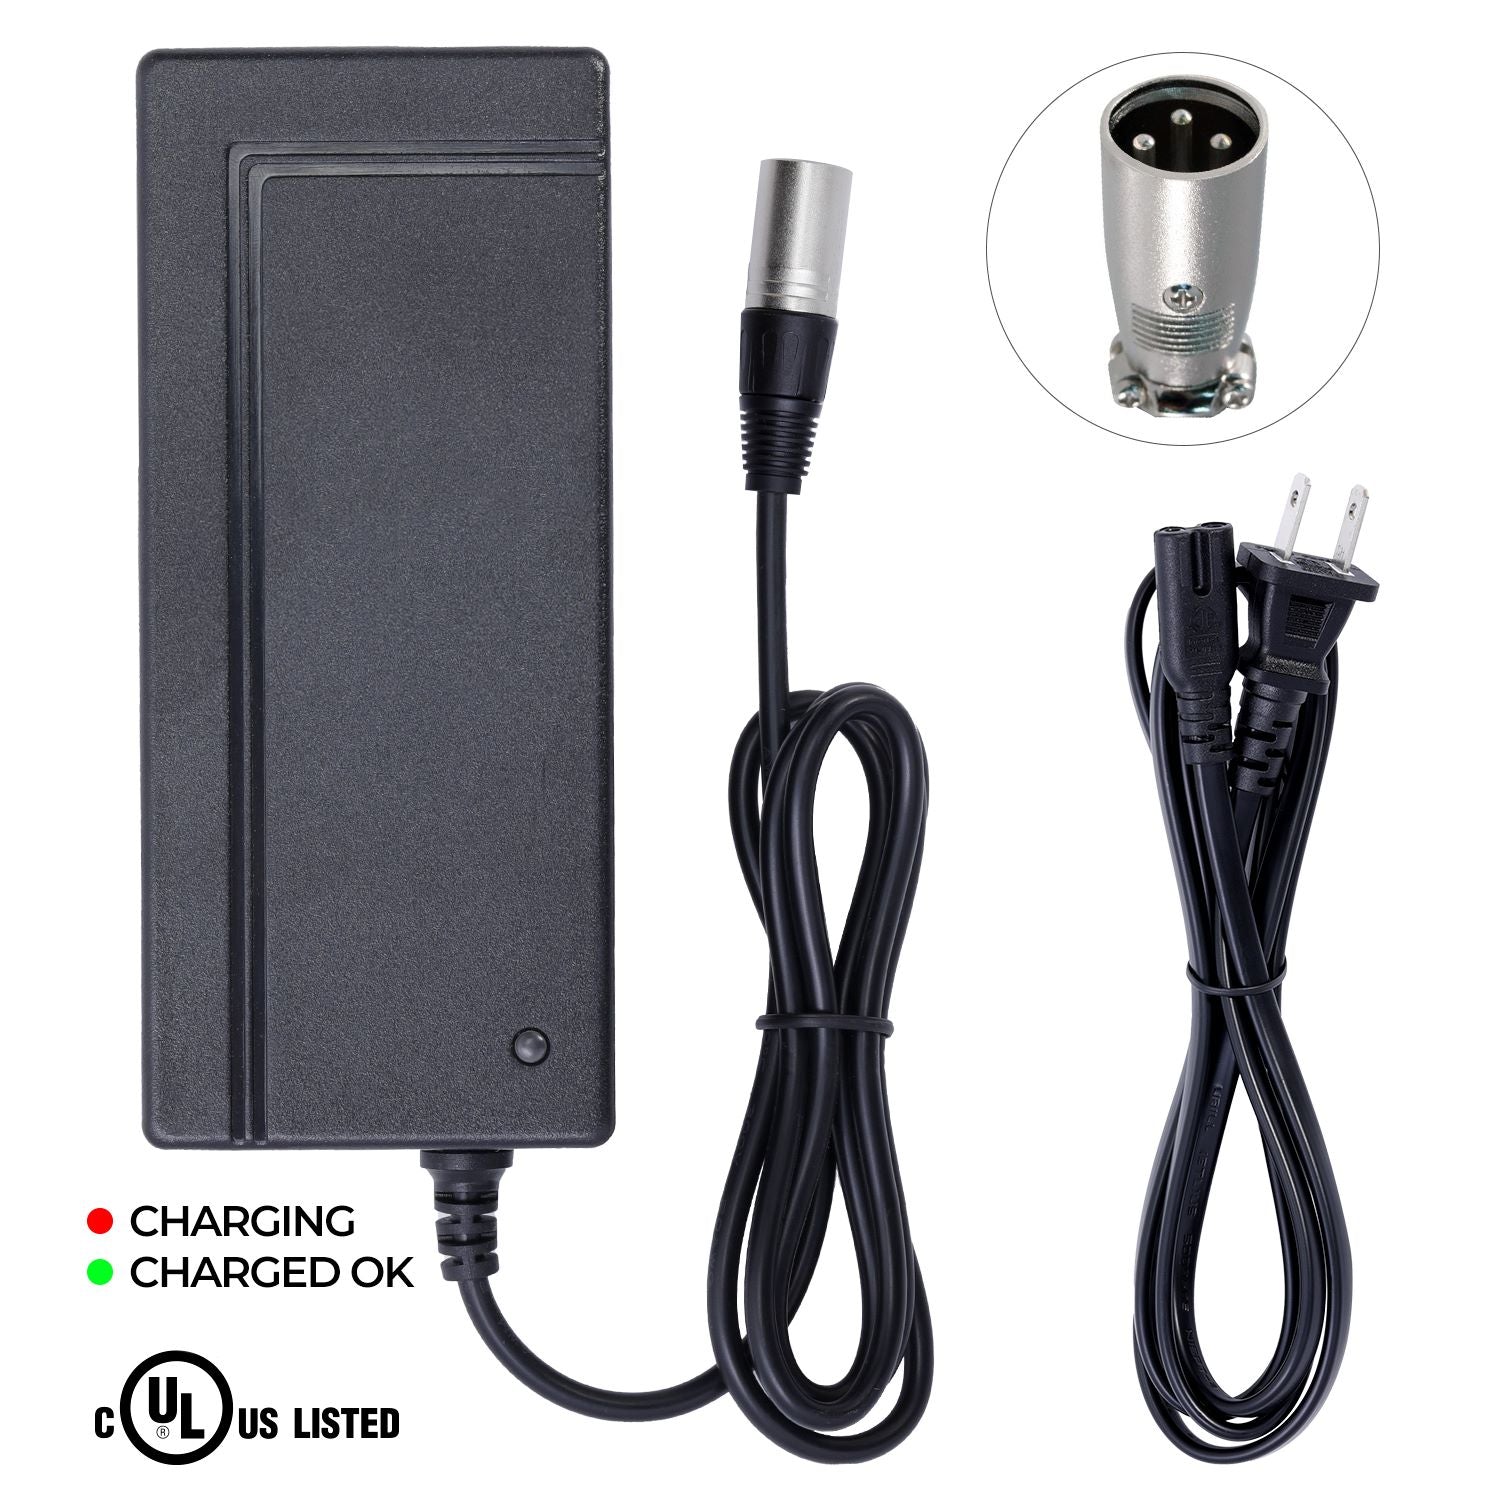 UL Certified Charger for Drive Medical Mobility Scooter